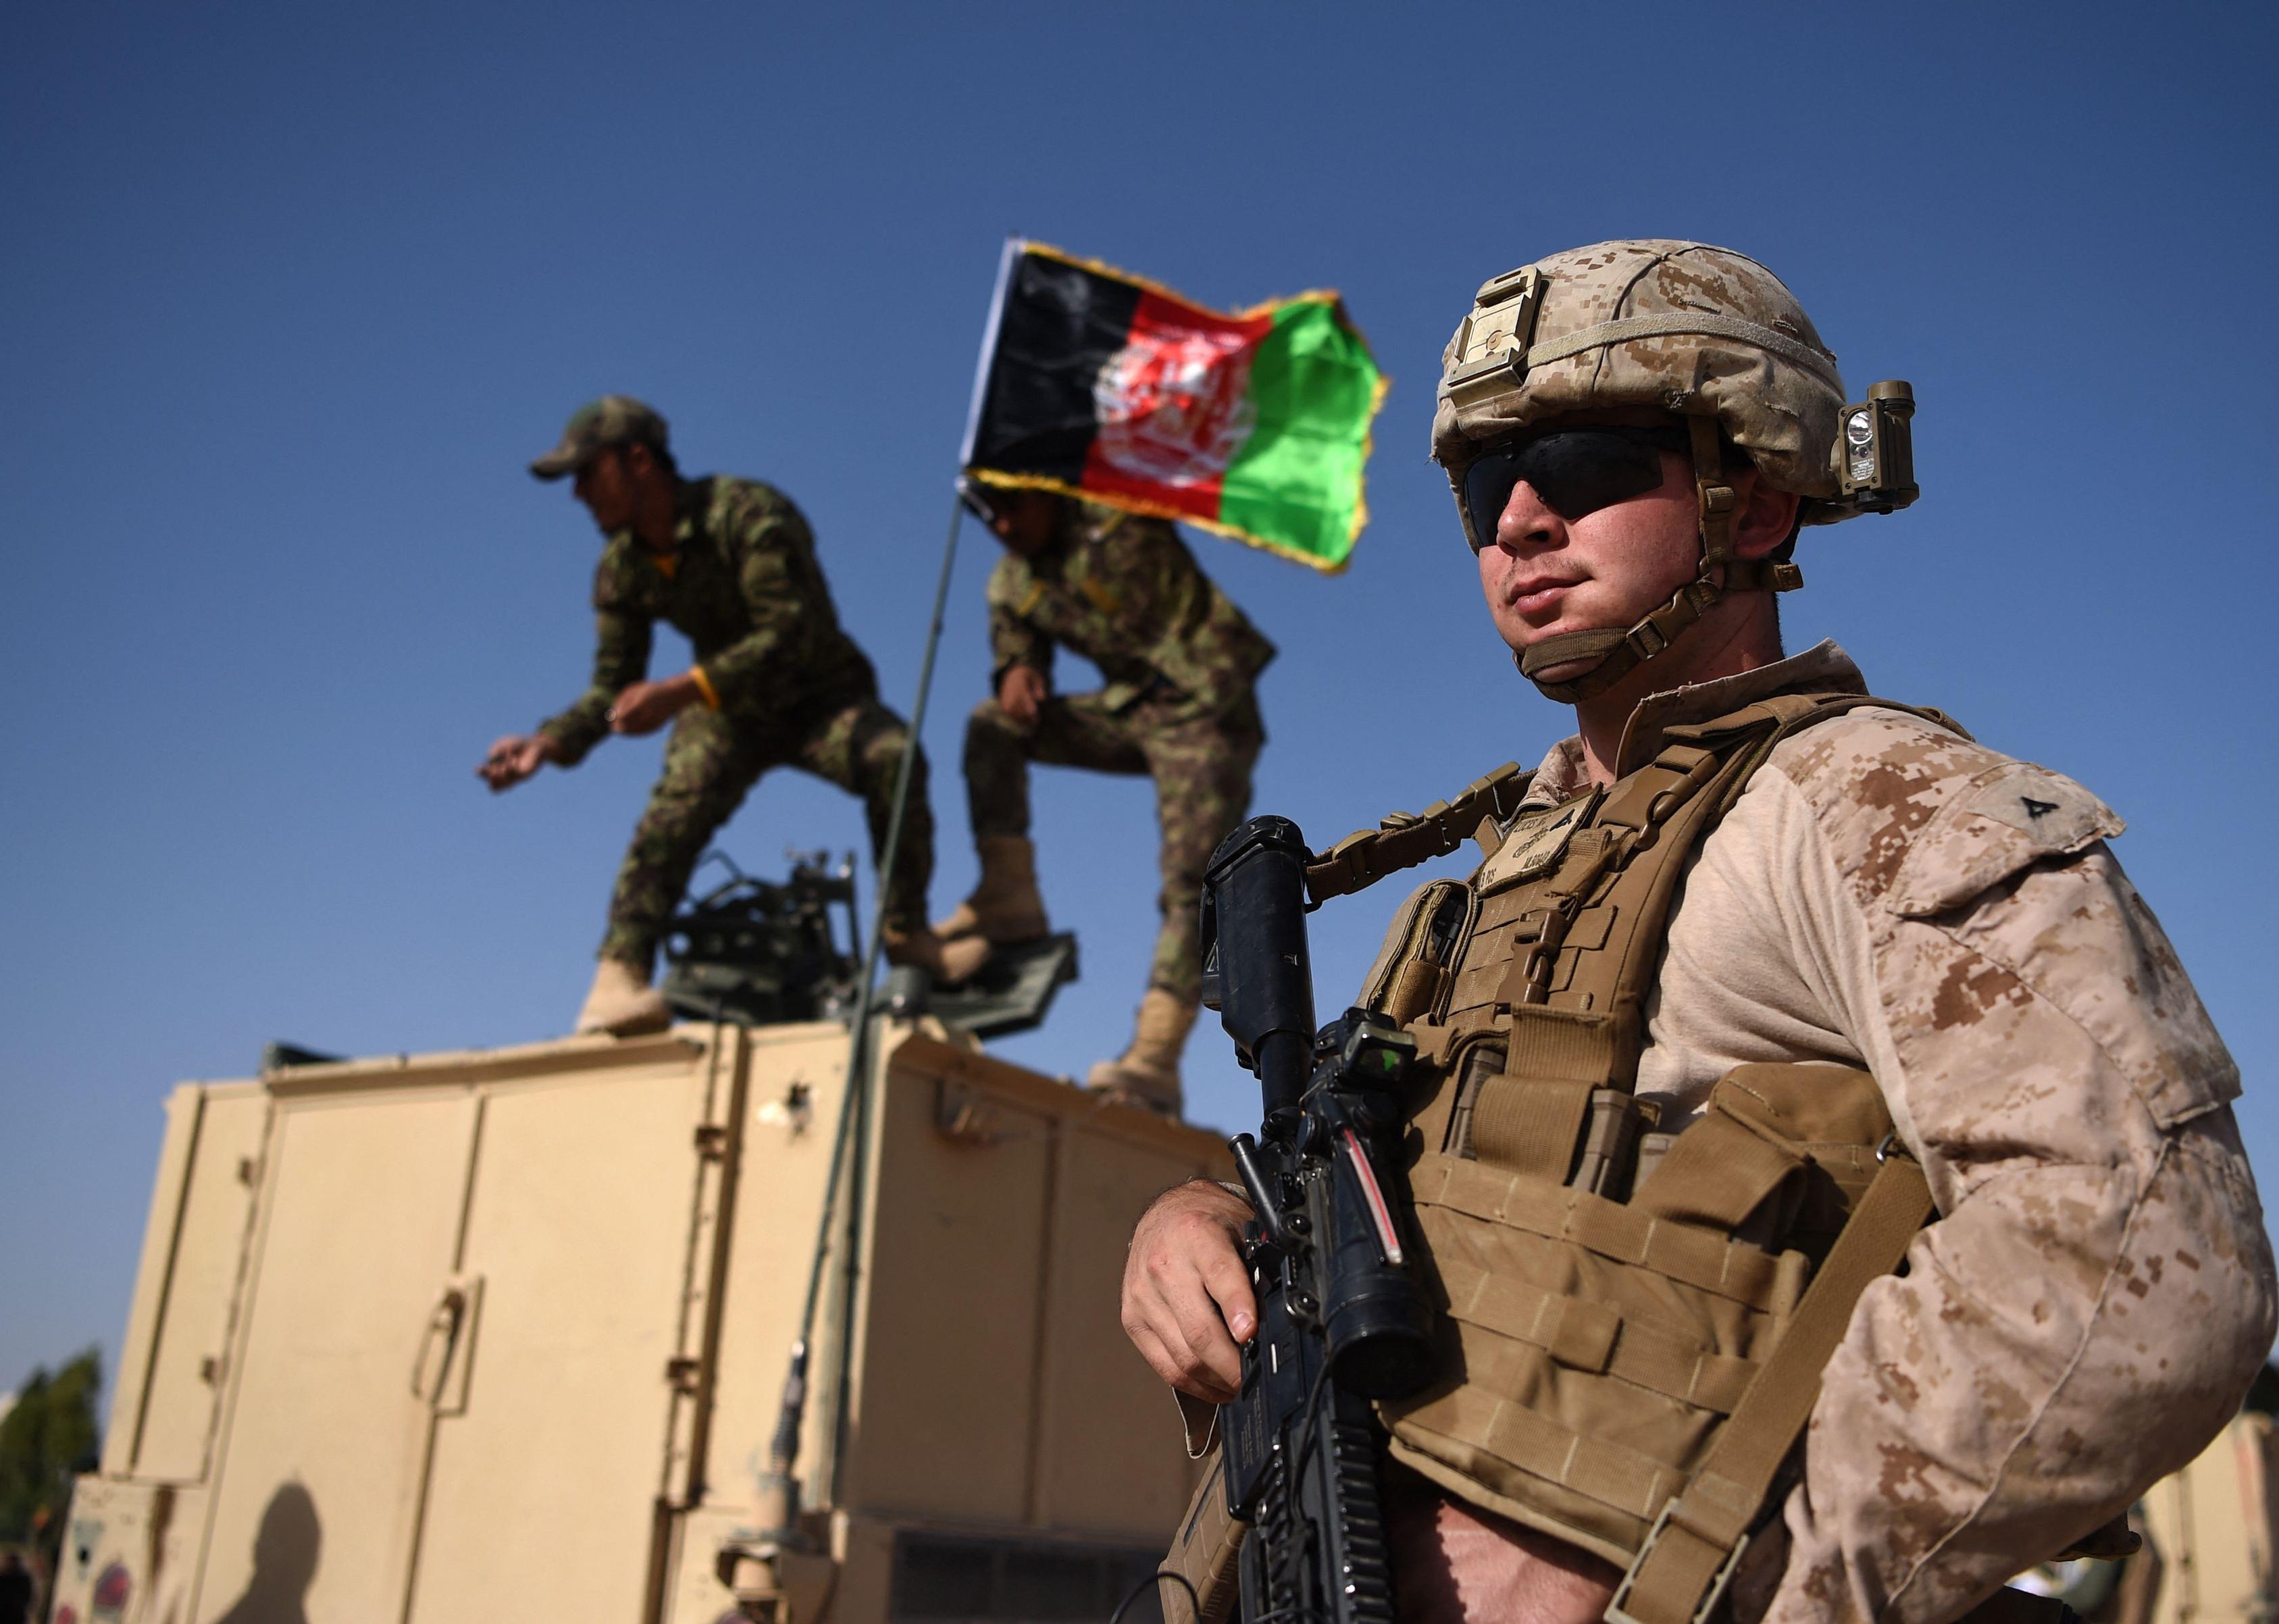 A US Marine looks on as Afghan National Army soldiers raise the Afghan National flag on an armed vehicle in the background.